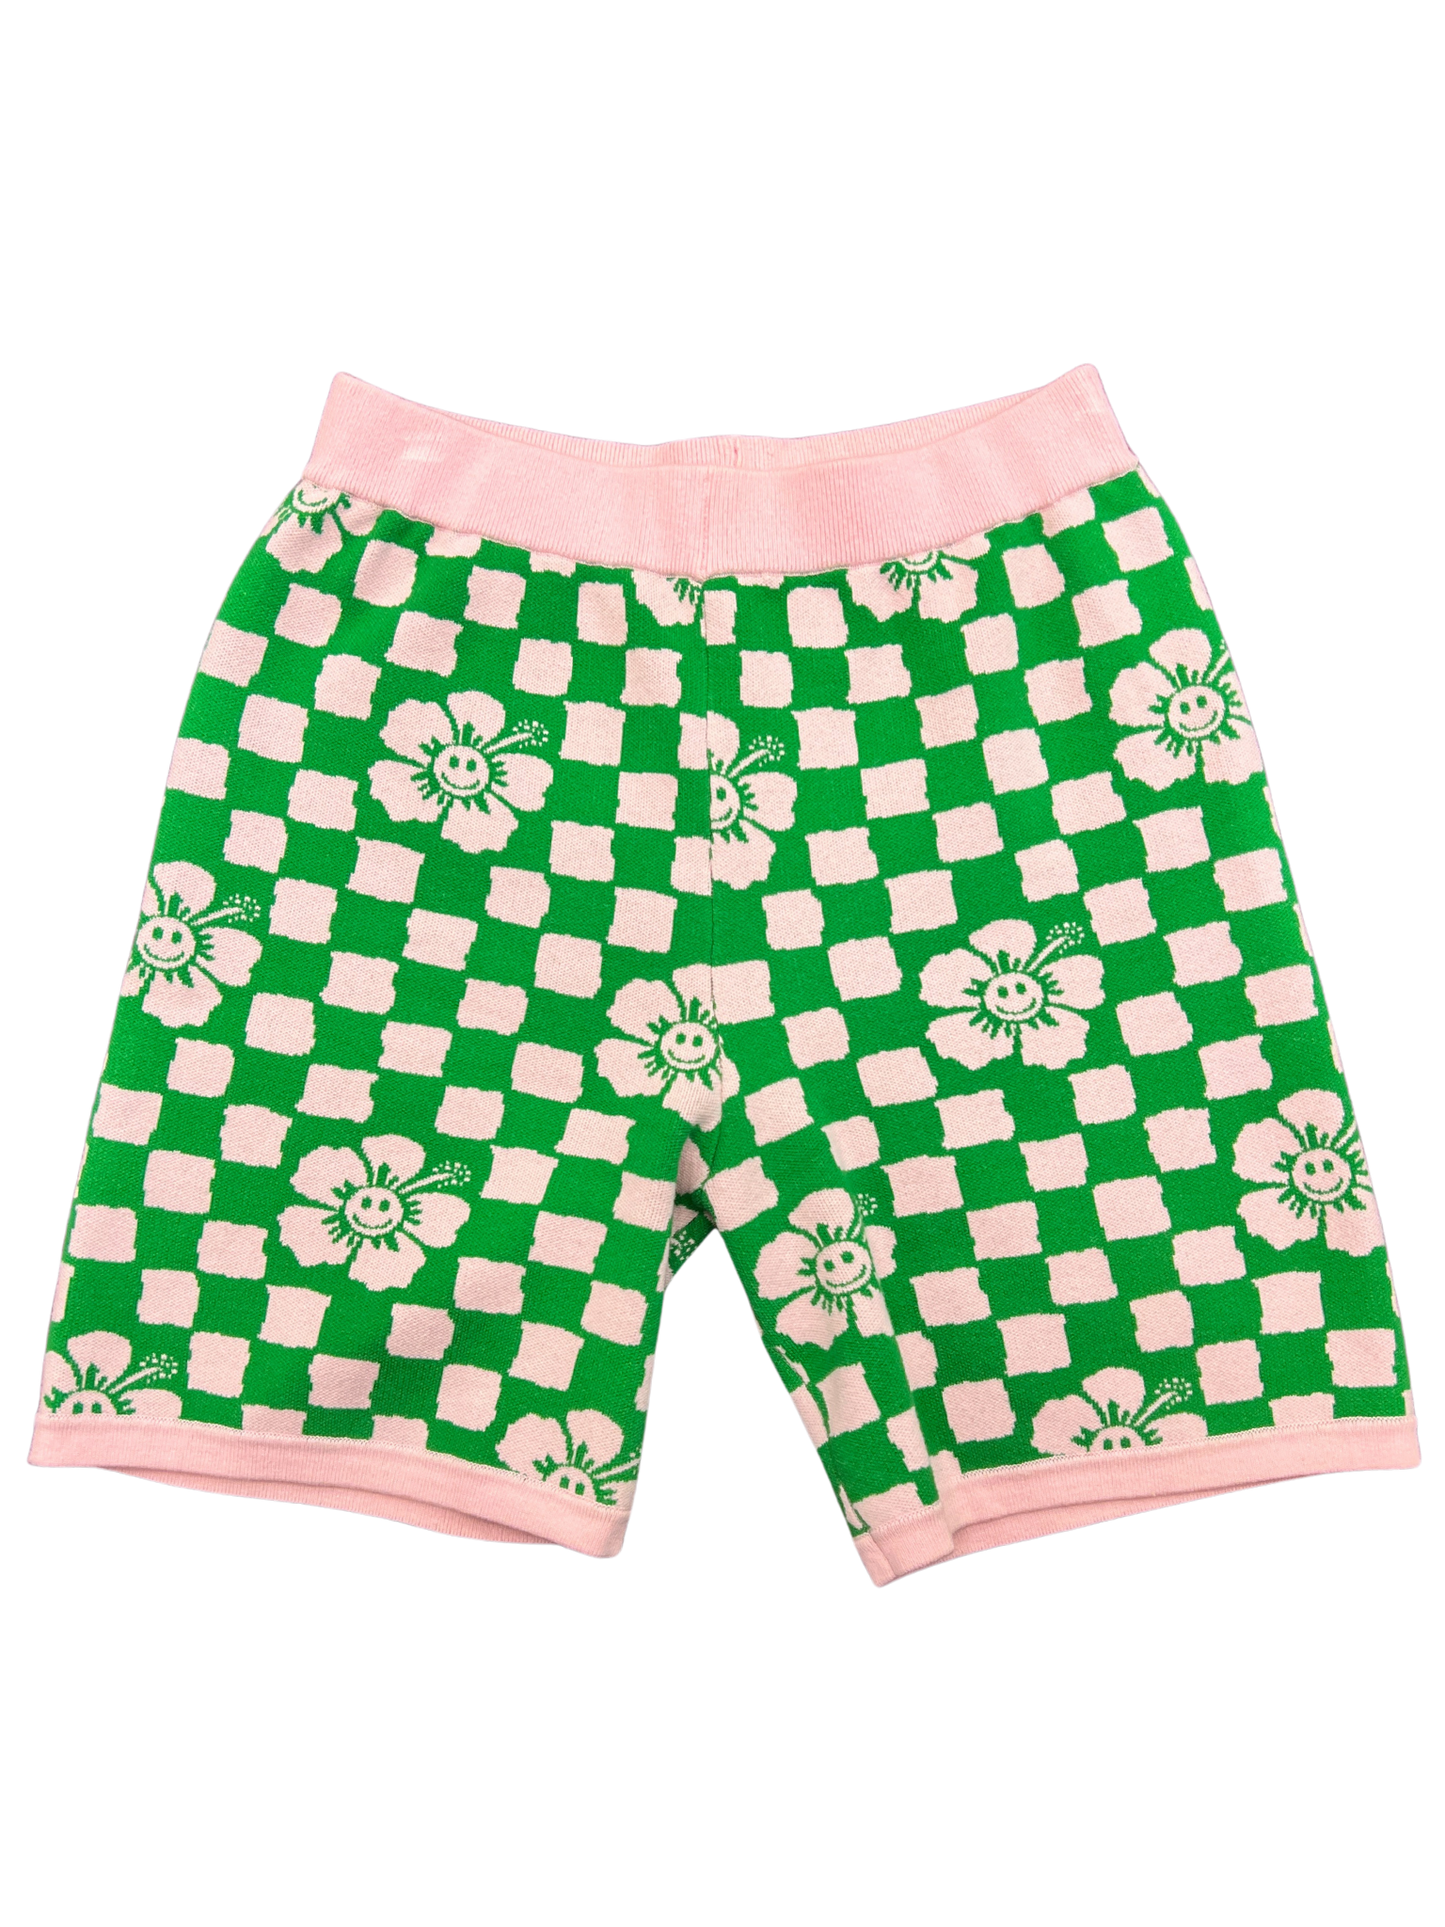 Size M - Emma Mulholland on Holiday Green and Pink Check Knit Bike Shorts